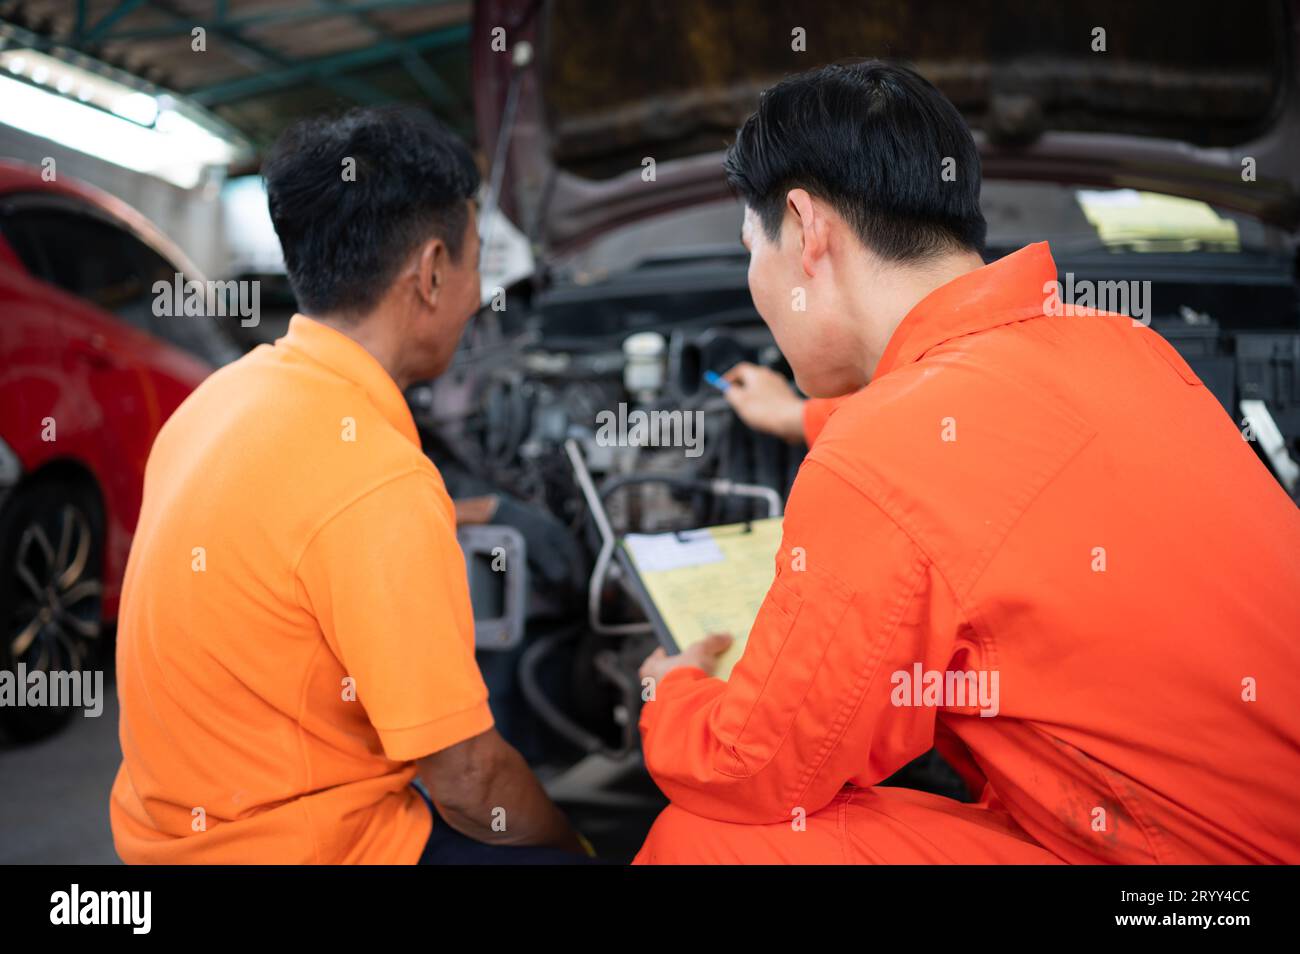 Both of auto mechanics are inspecting the engine of a customer's car being brought in for repair at a garage. Stock Photo